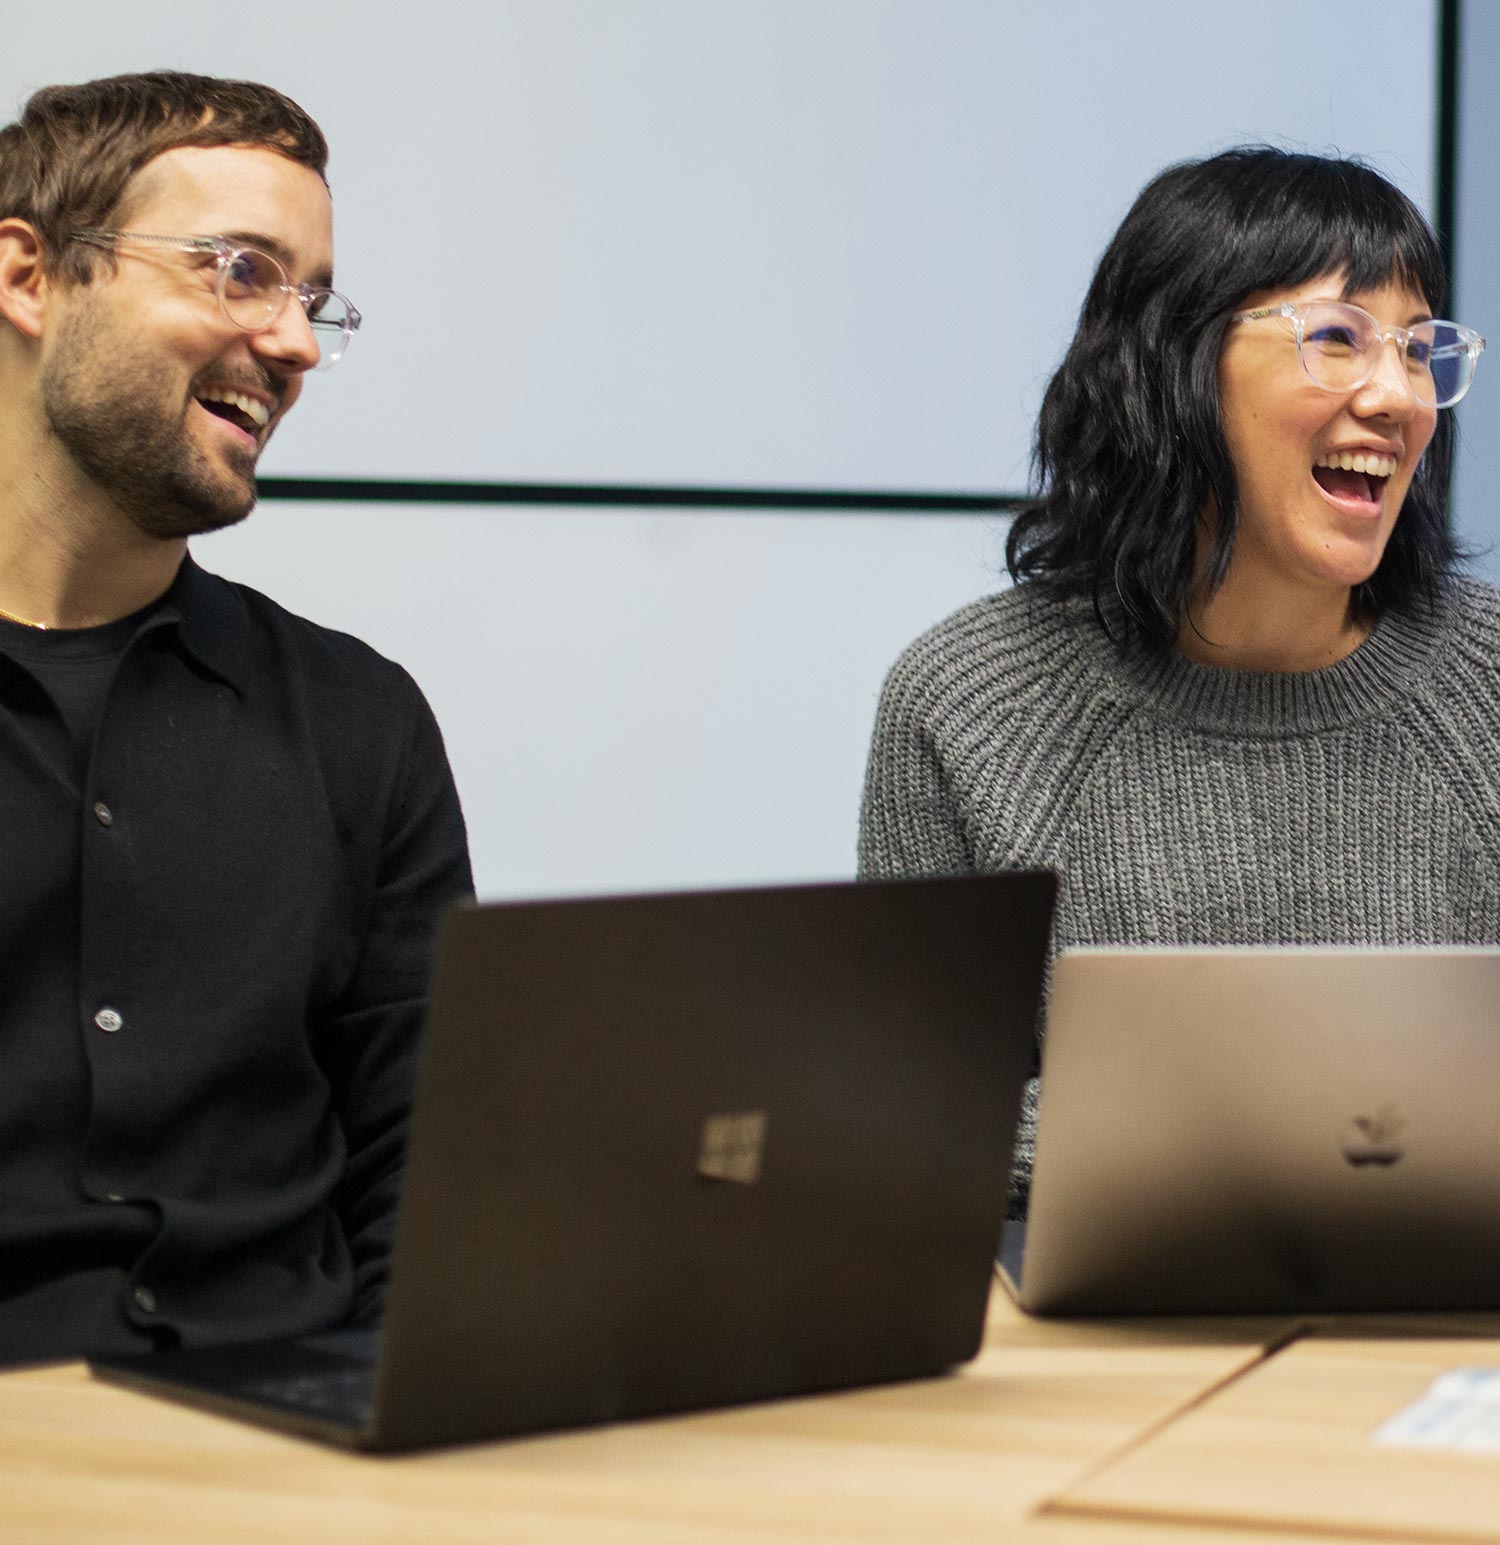 Members of the Transpire team laughing during a meeting around laptops